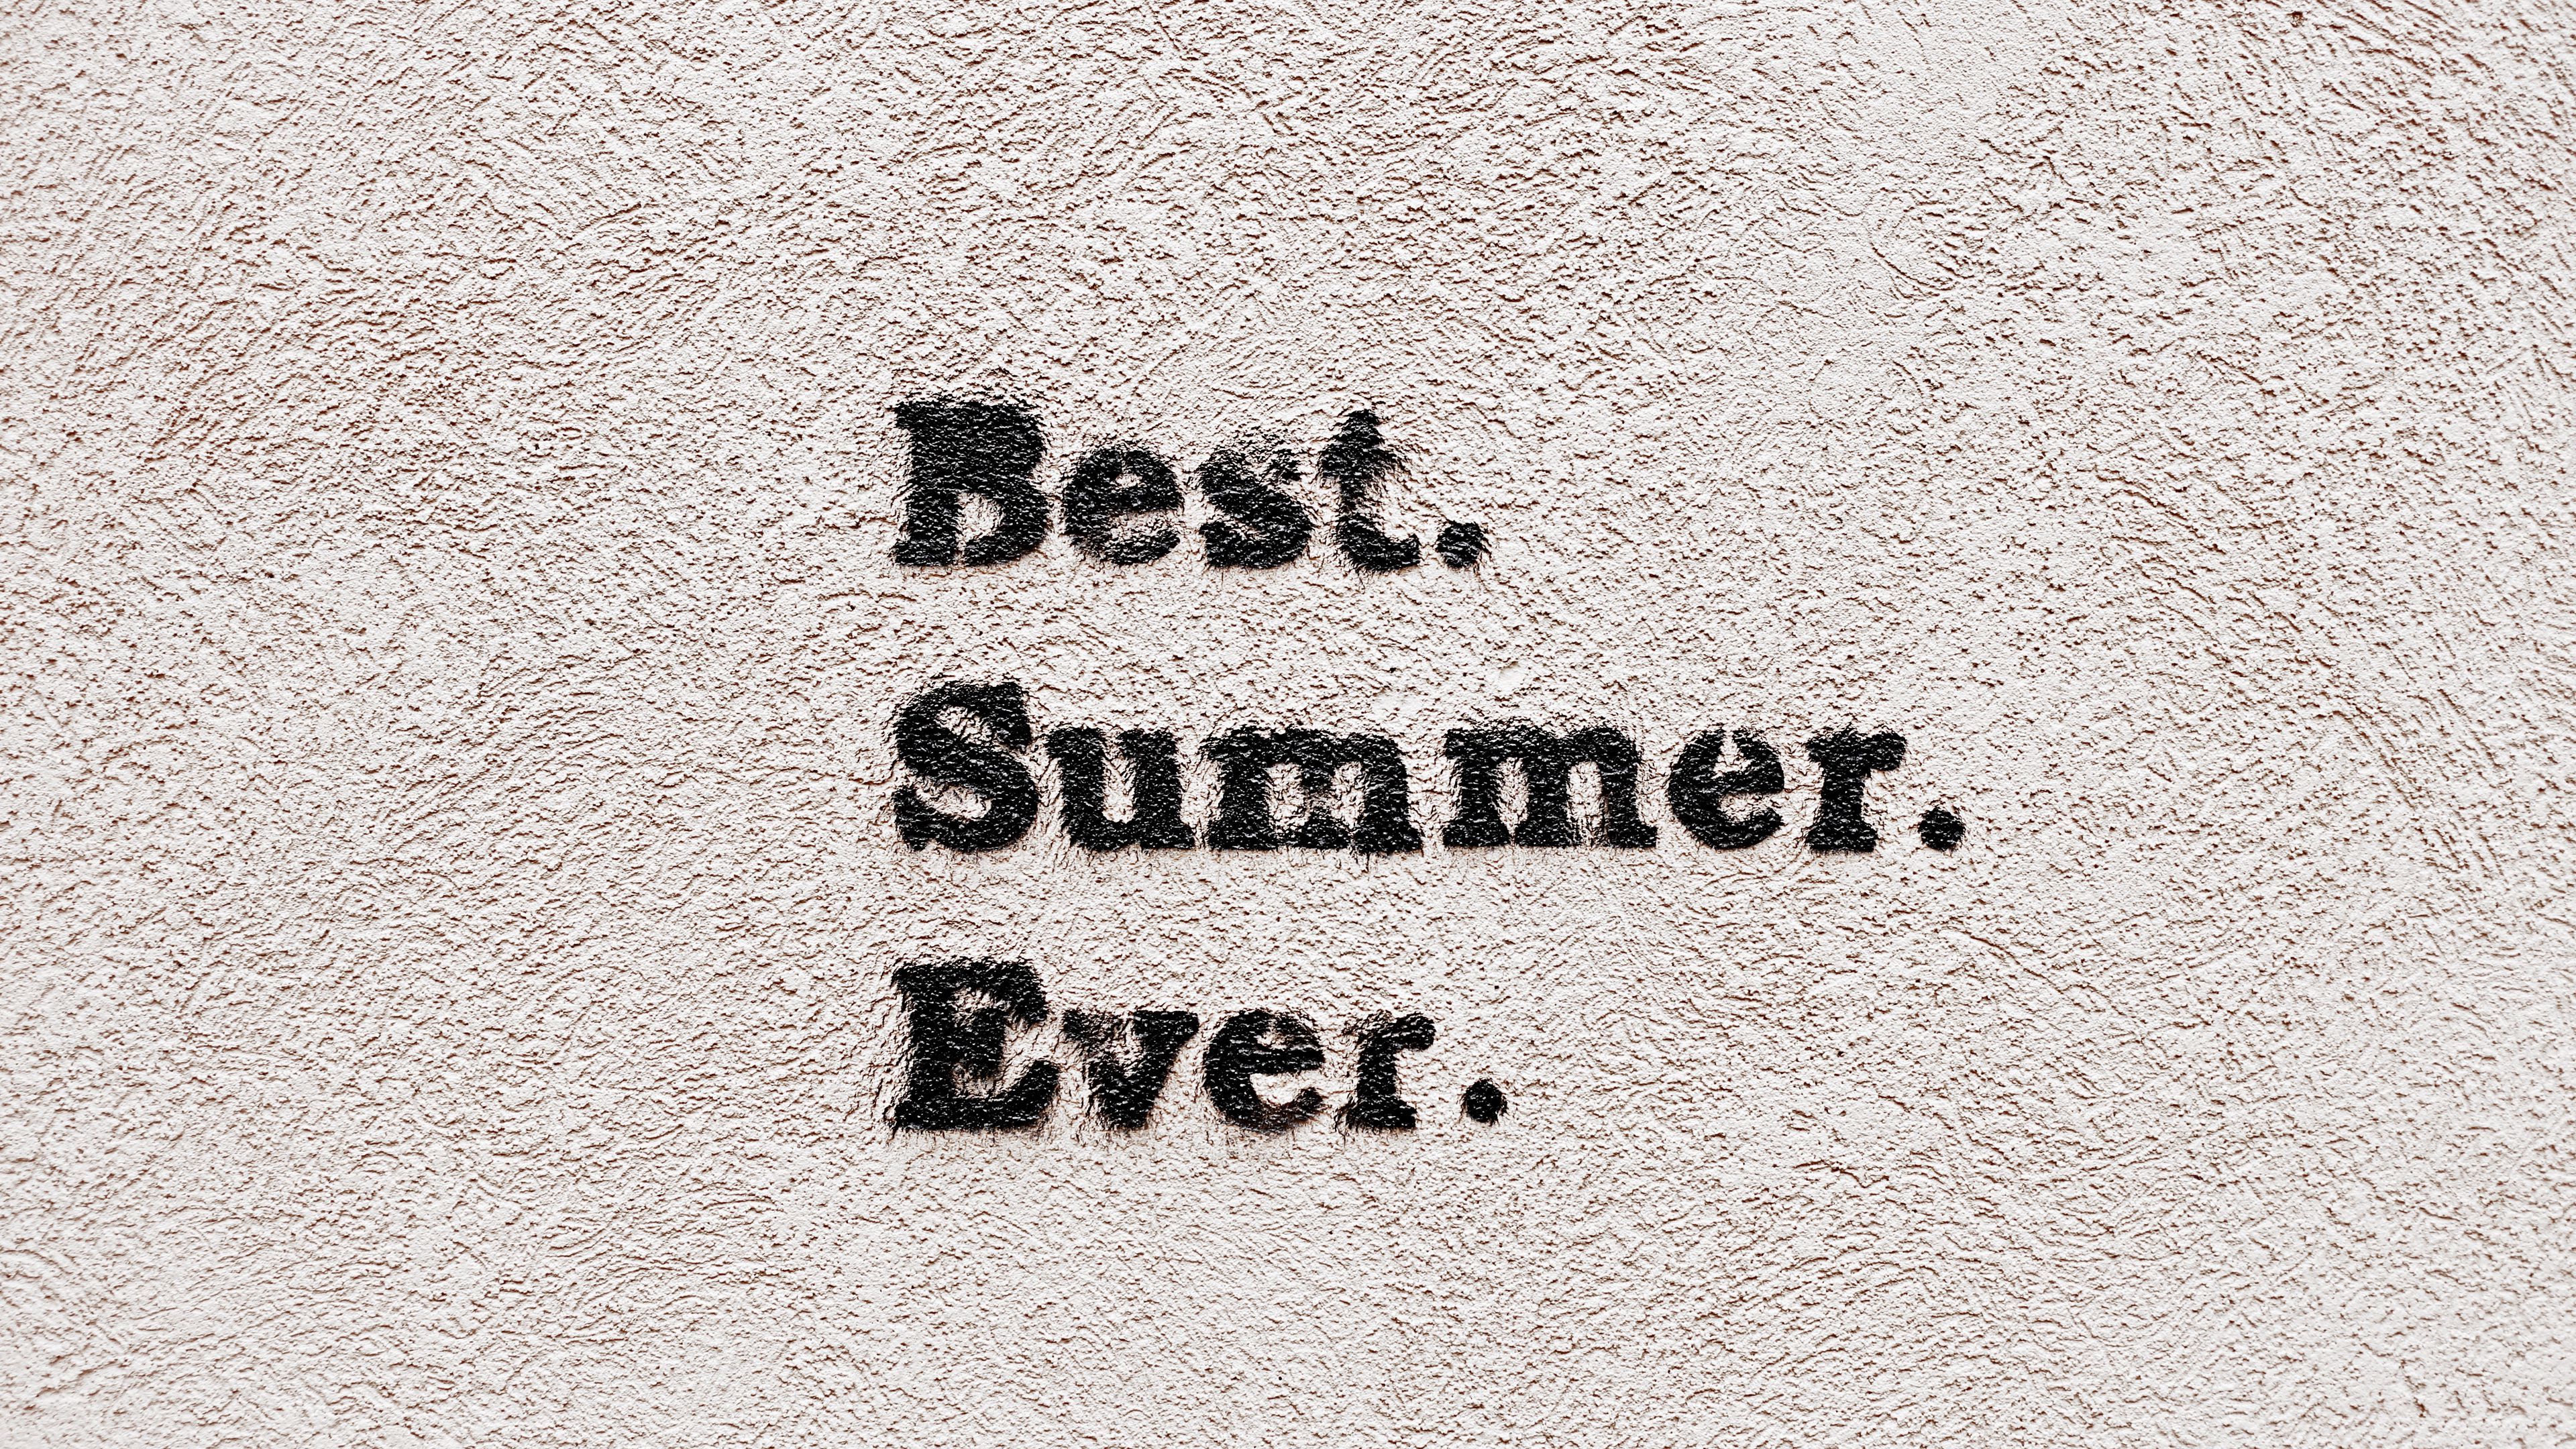 Download wallpaper 3840x2160 inscription, text, inspiration, summer, words, letters 4k uhd 16:9 HD background